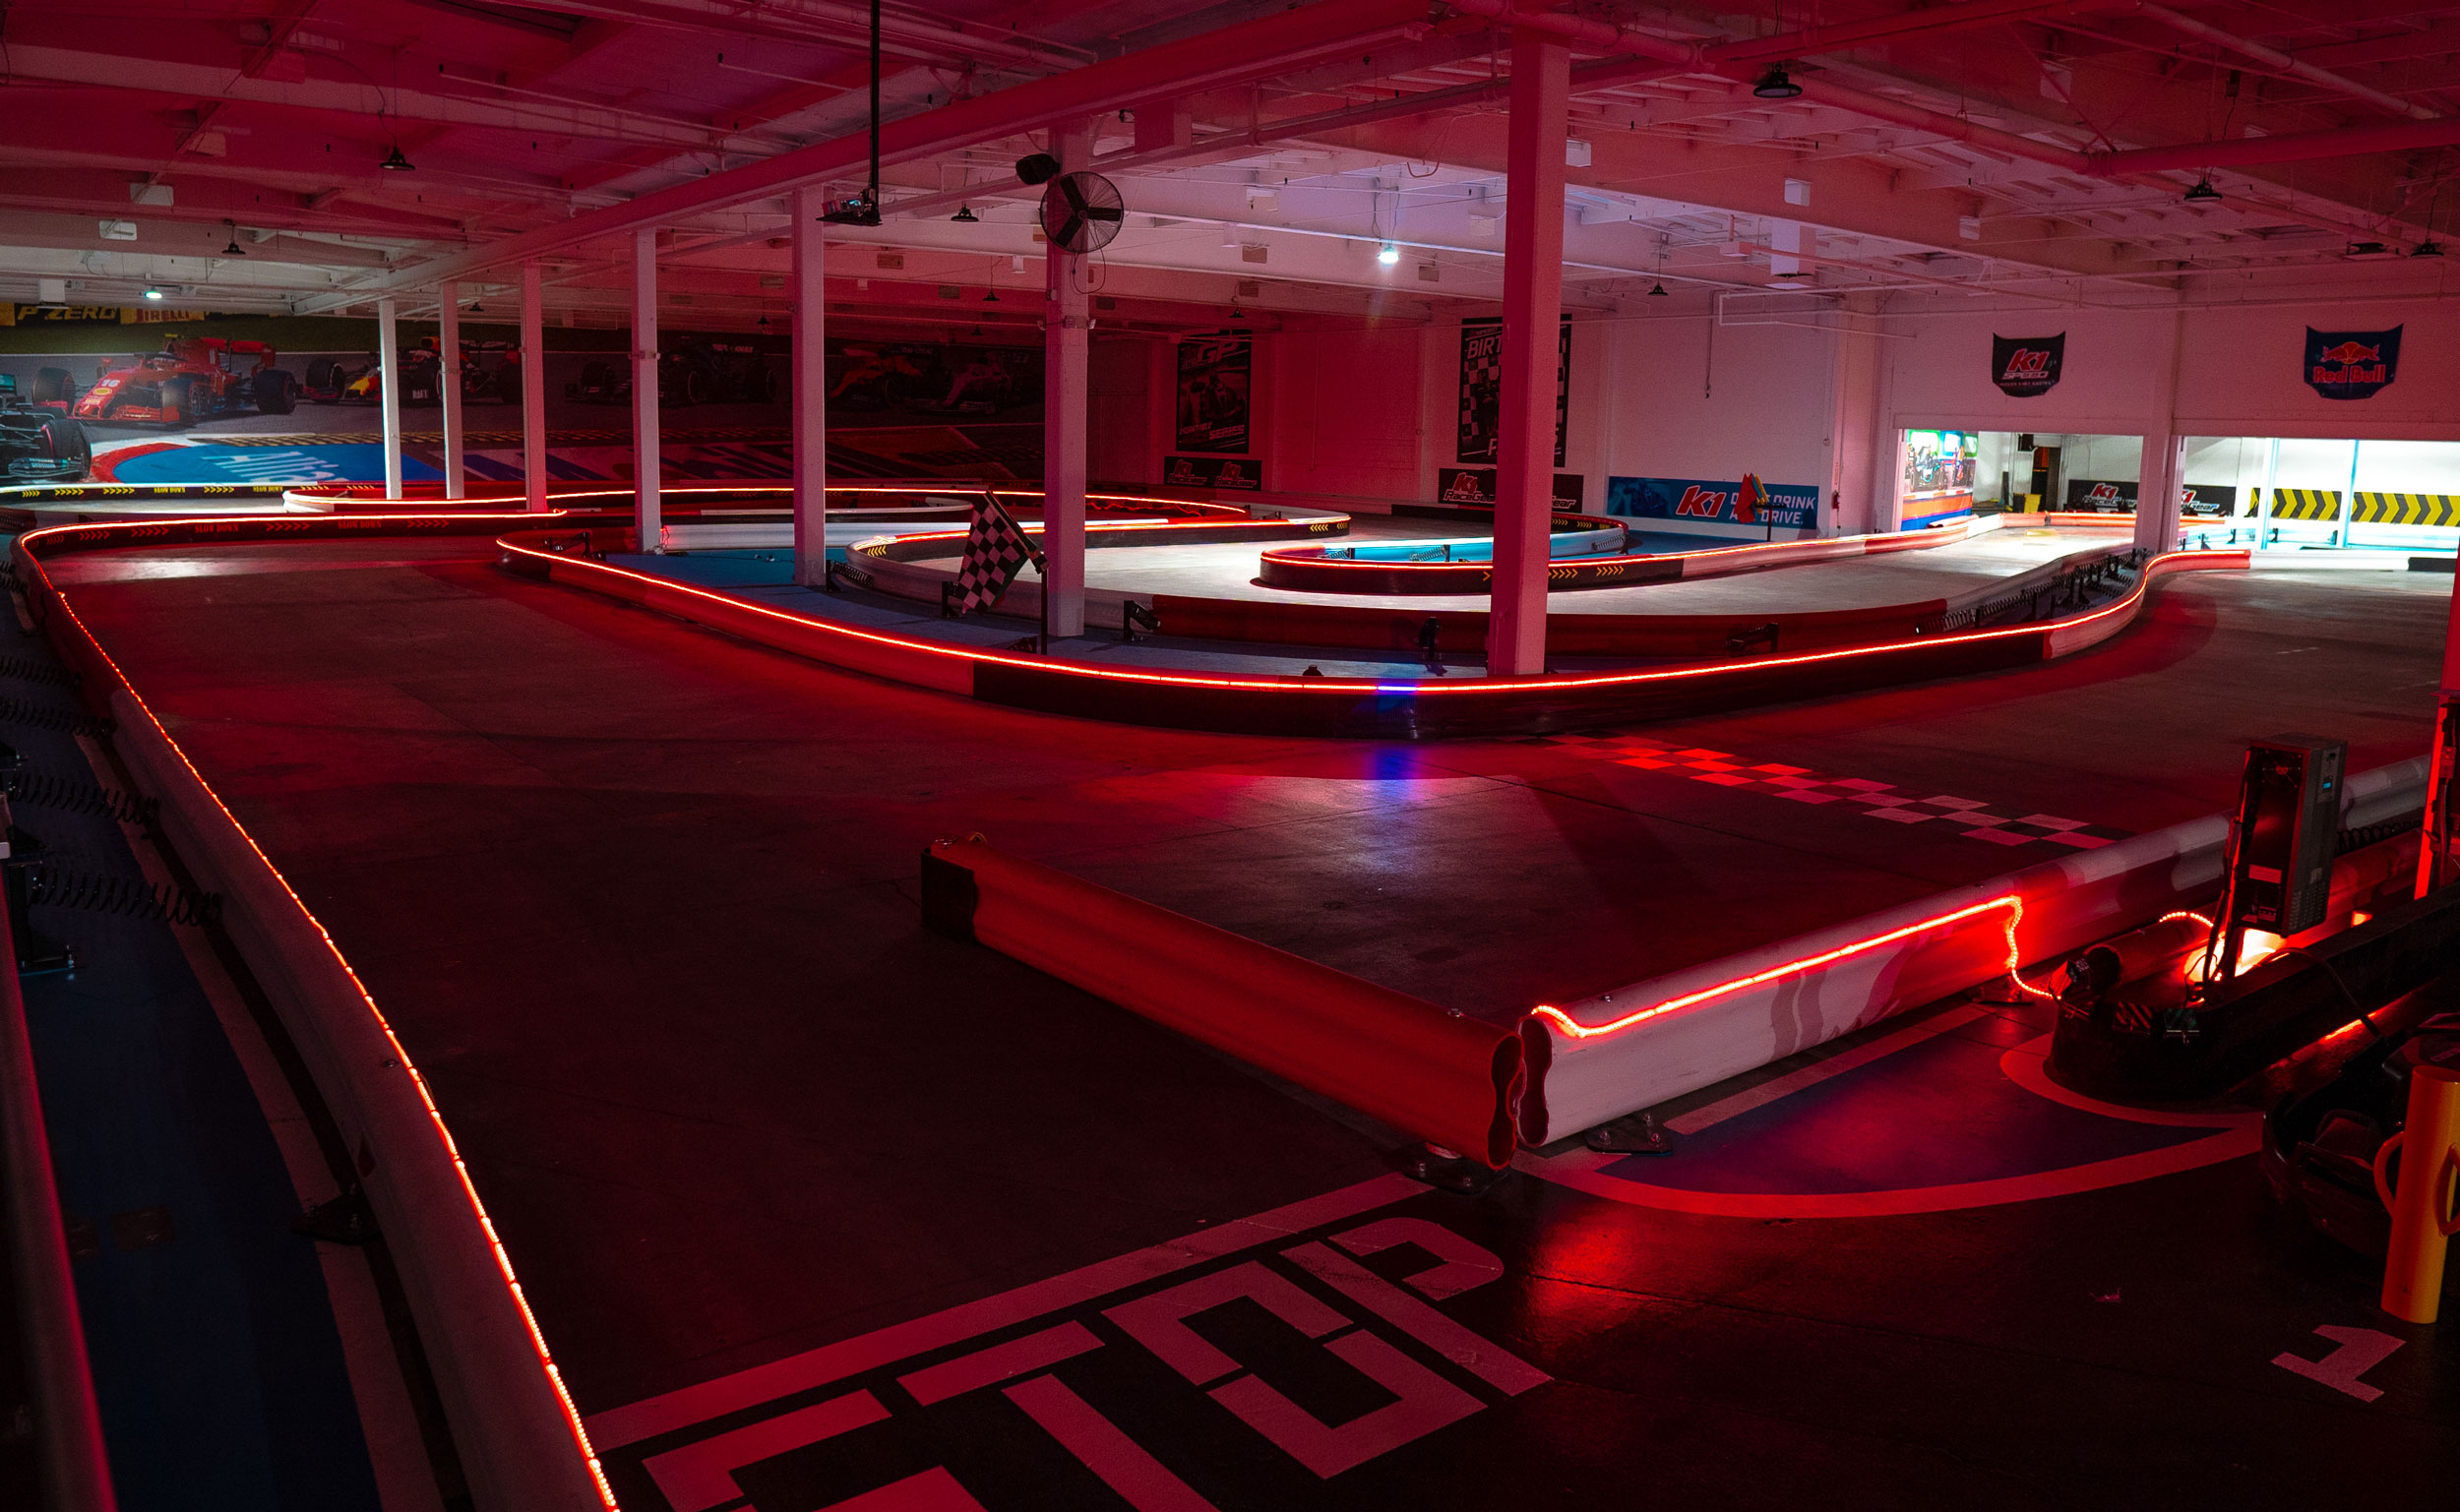 The LED-illuminated track barriers inside K1 Speed Burbank transforms the traditional go kart racing experience into something new and exciting